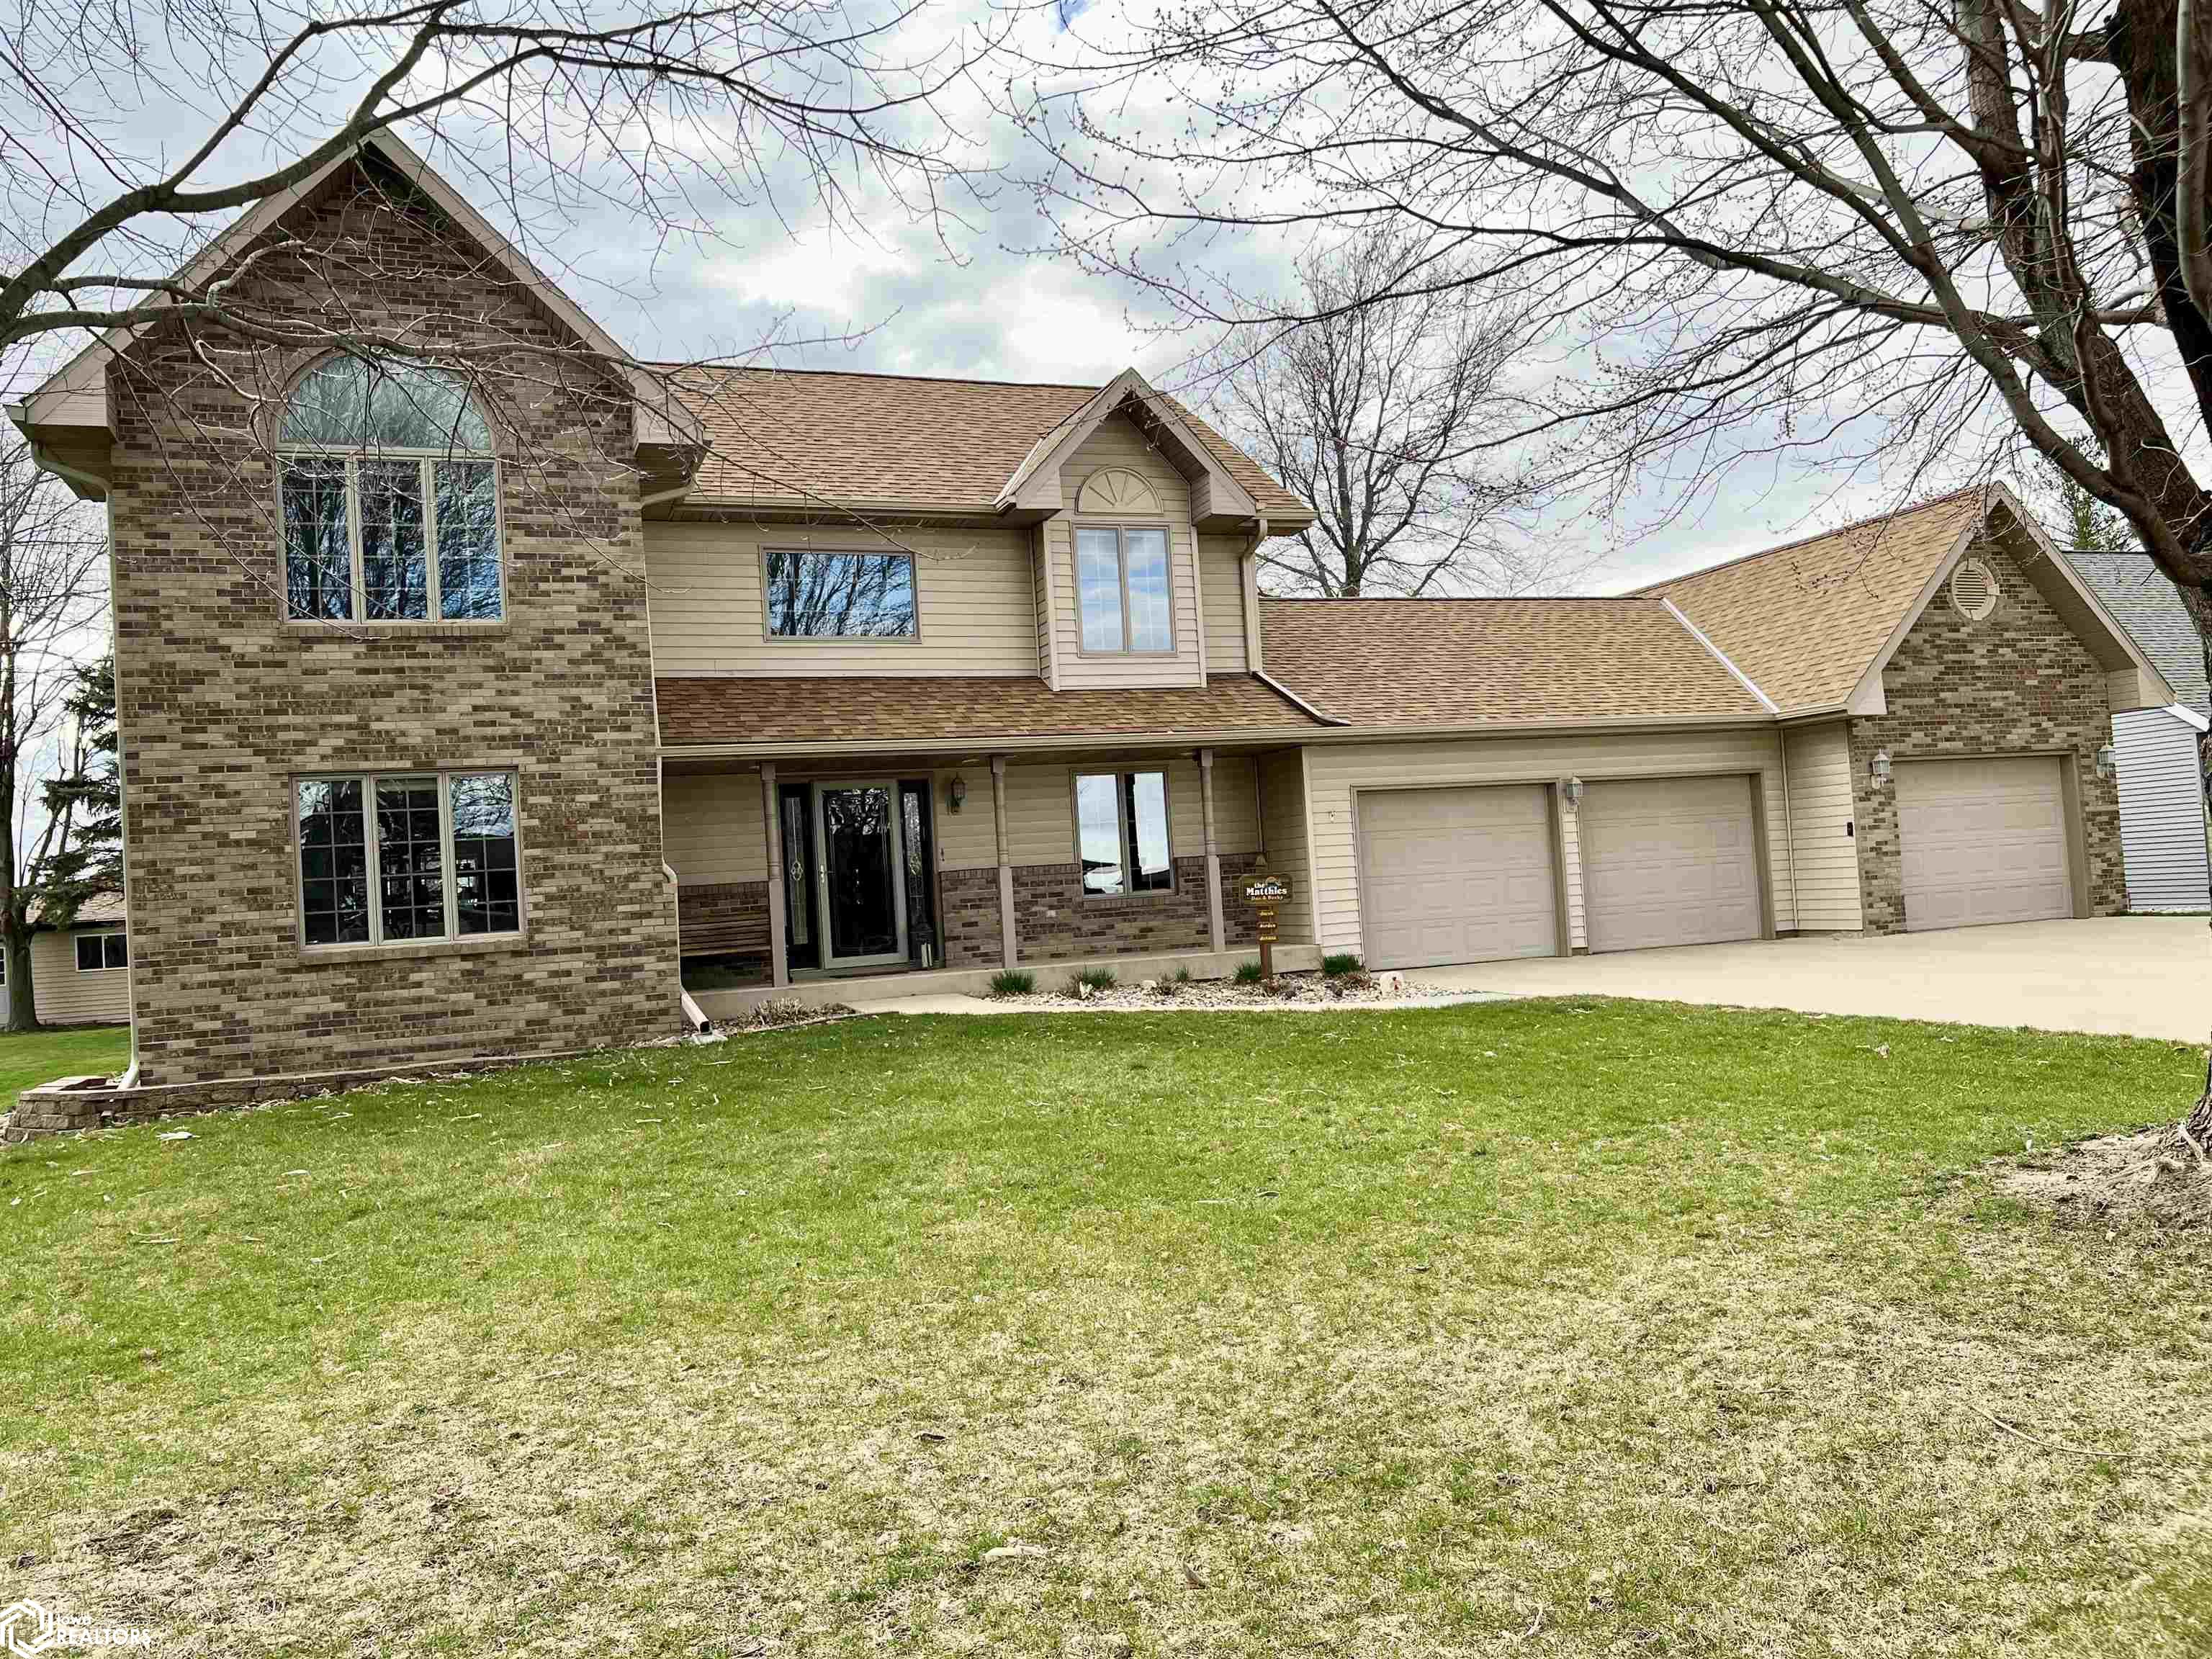 1108 Valley View Dr, Ida Grove, Iowa 51445, 4 Bedrooms Bedrooms, ,3 BathroomsBathrooms,Single Family,For Sale,Valley View Dr,6316338